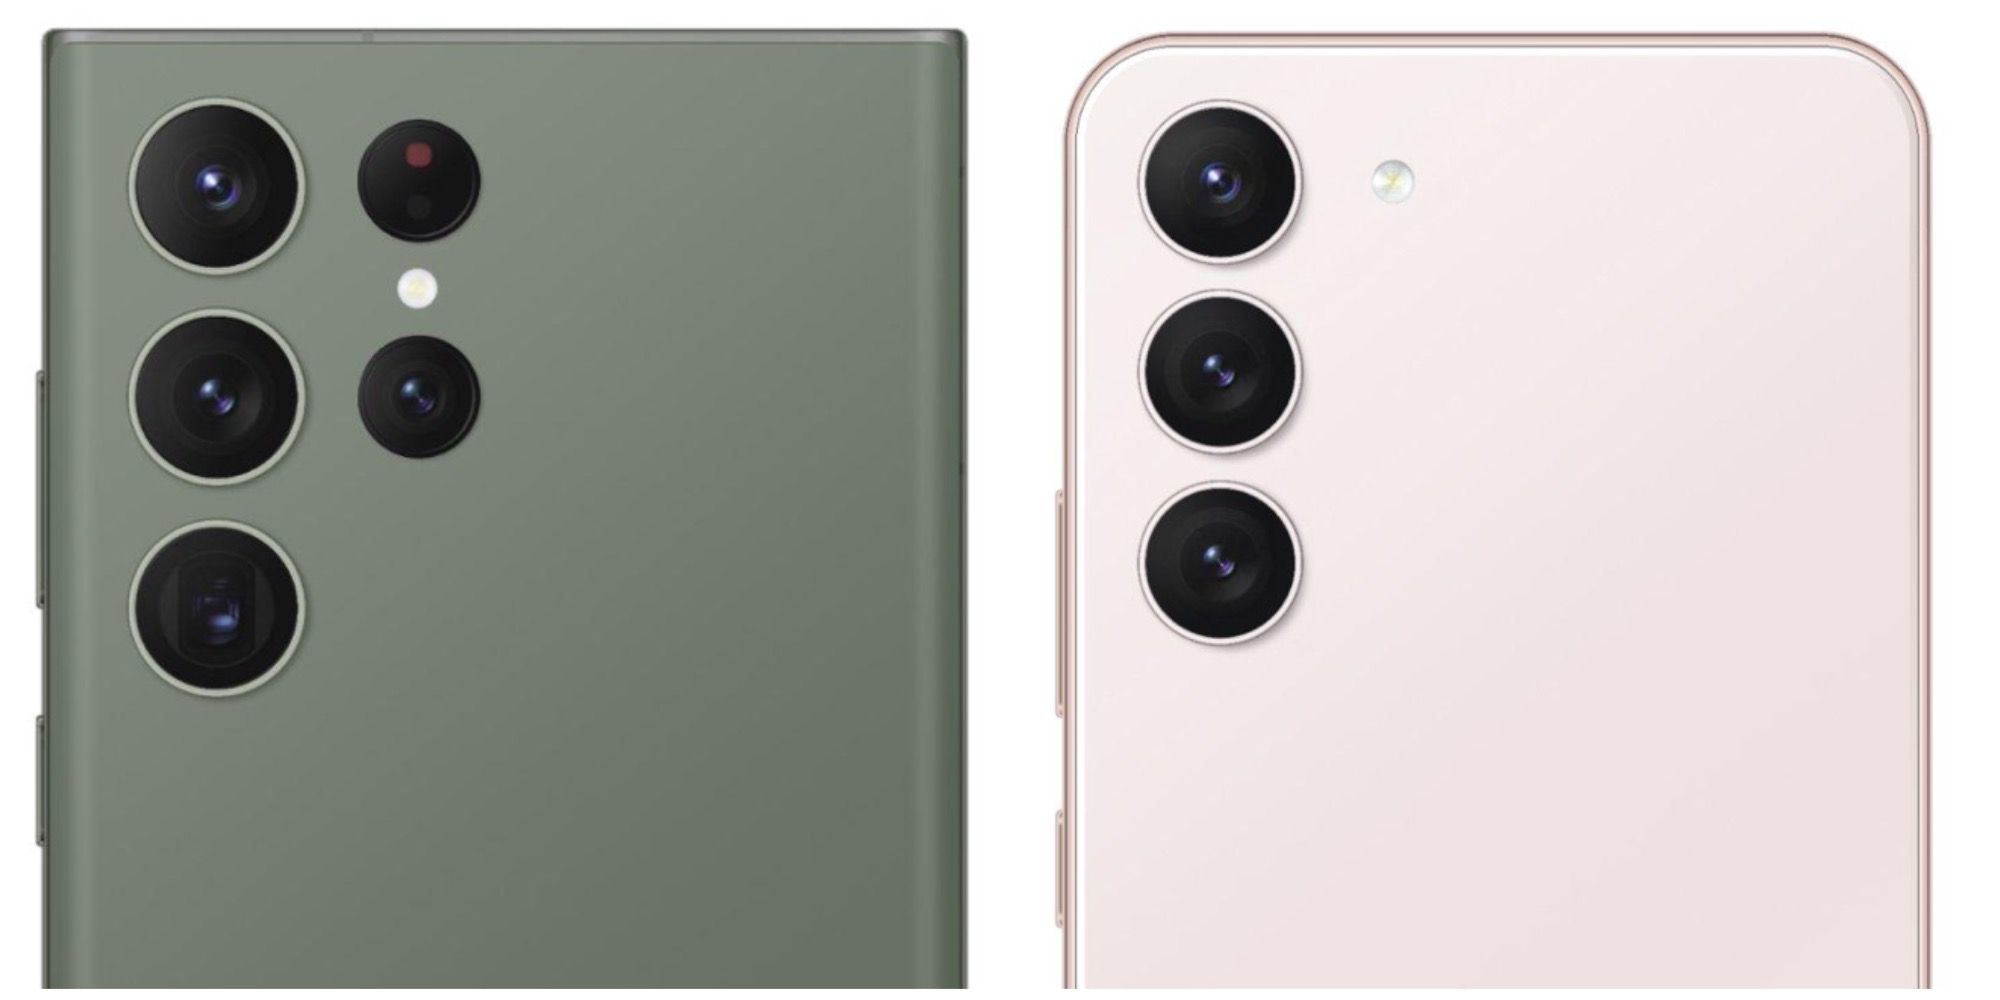 Galaxy S23 Ultra shown in green and Galaxy S23 Plus depicted in light pink colors. 